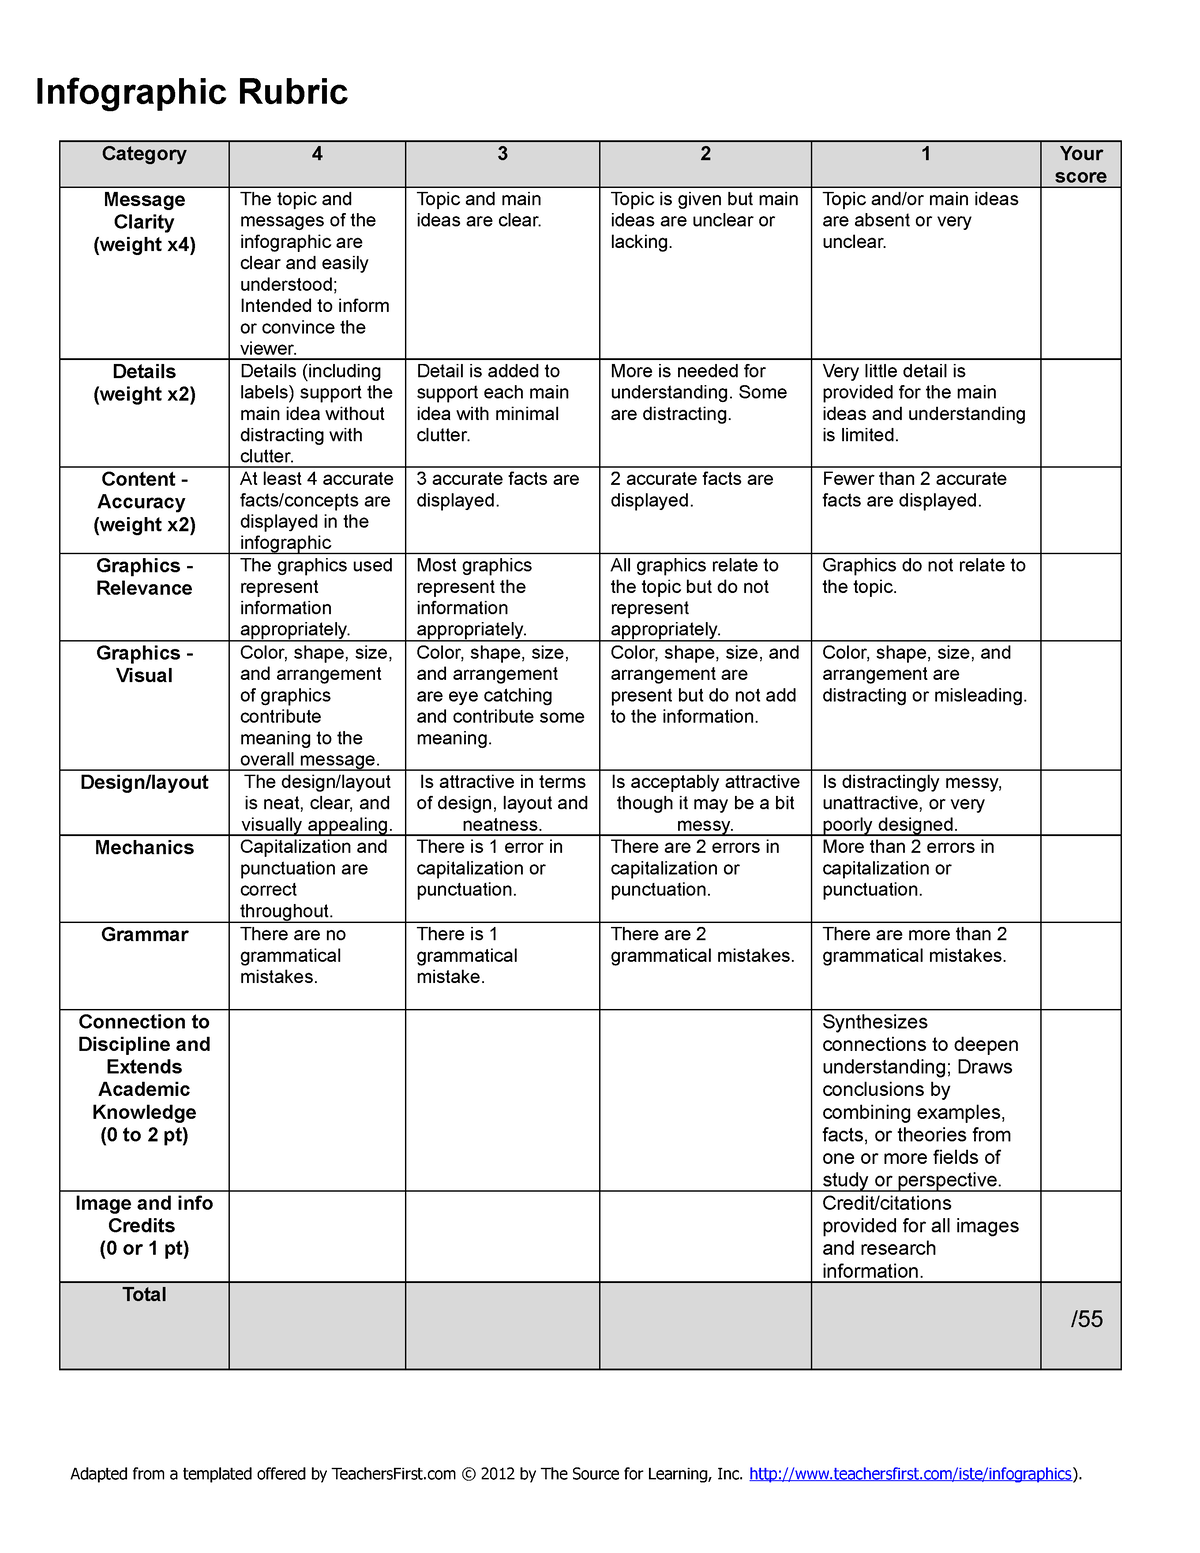 science infographic rubric